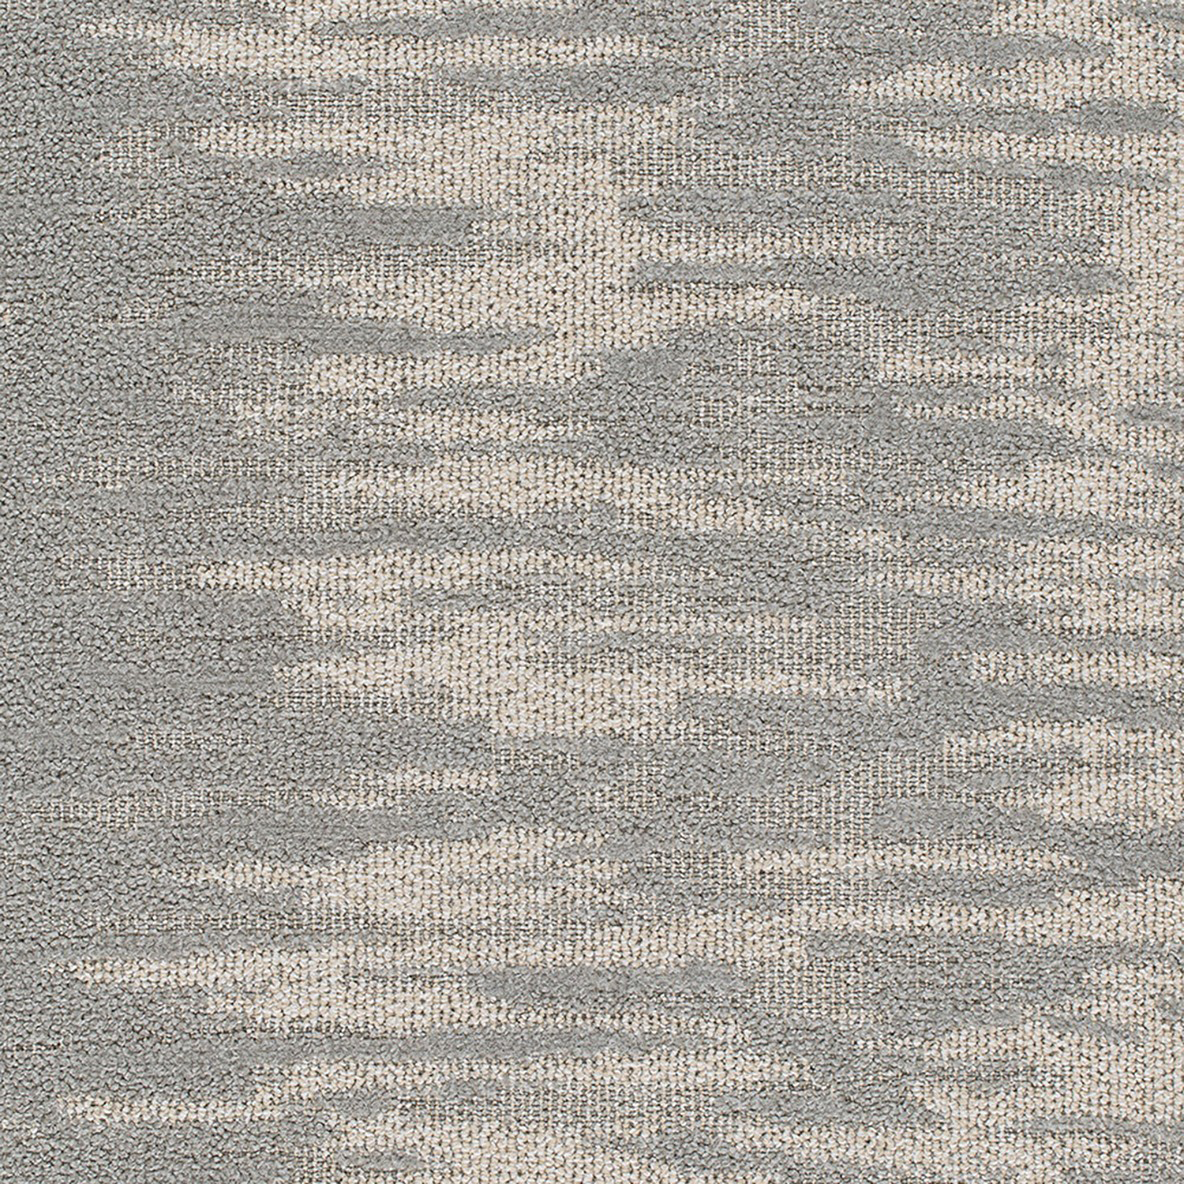 Oyster color close up Up and Away Commercial Carpet Tile .30 Inch x 50x50 cm per Tile